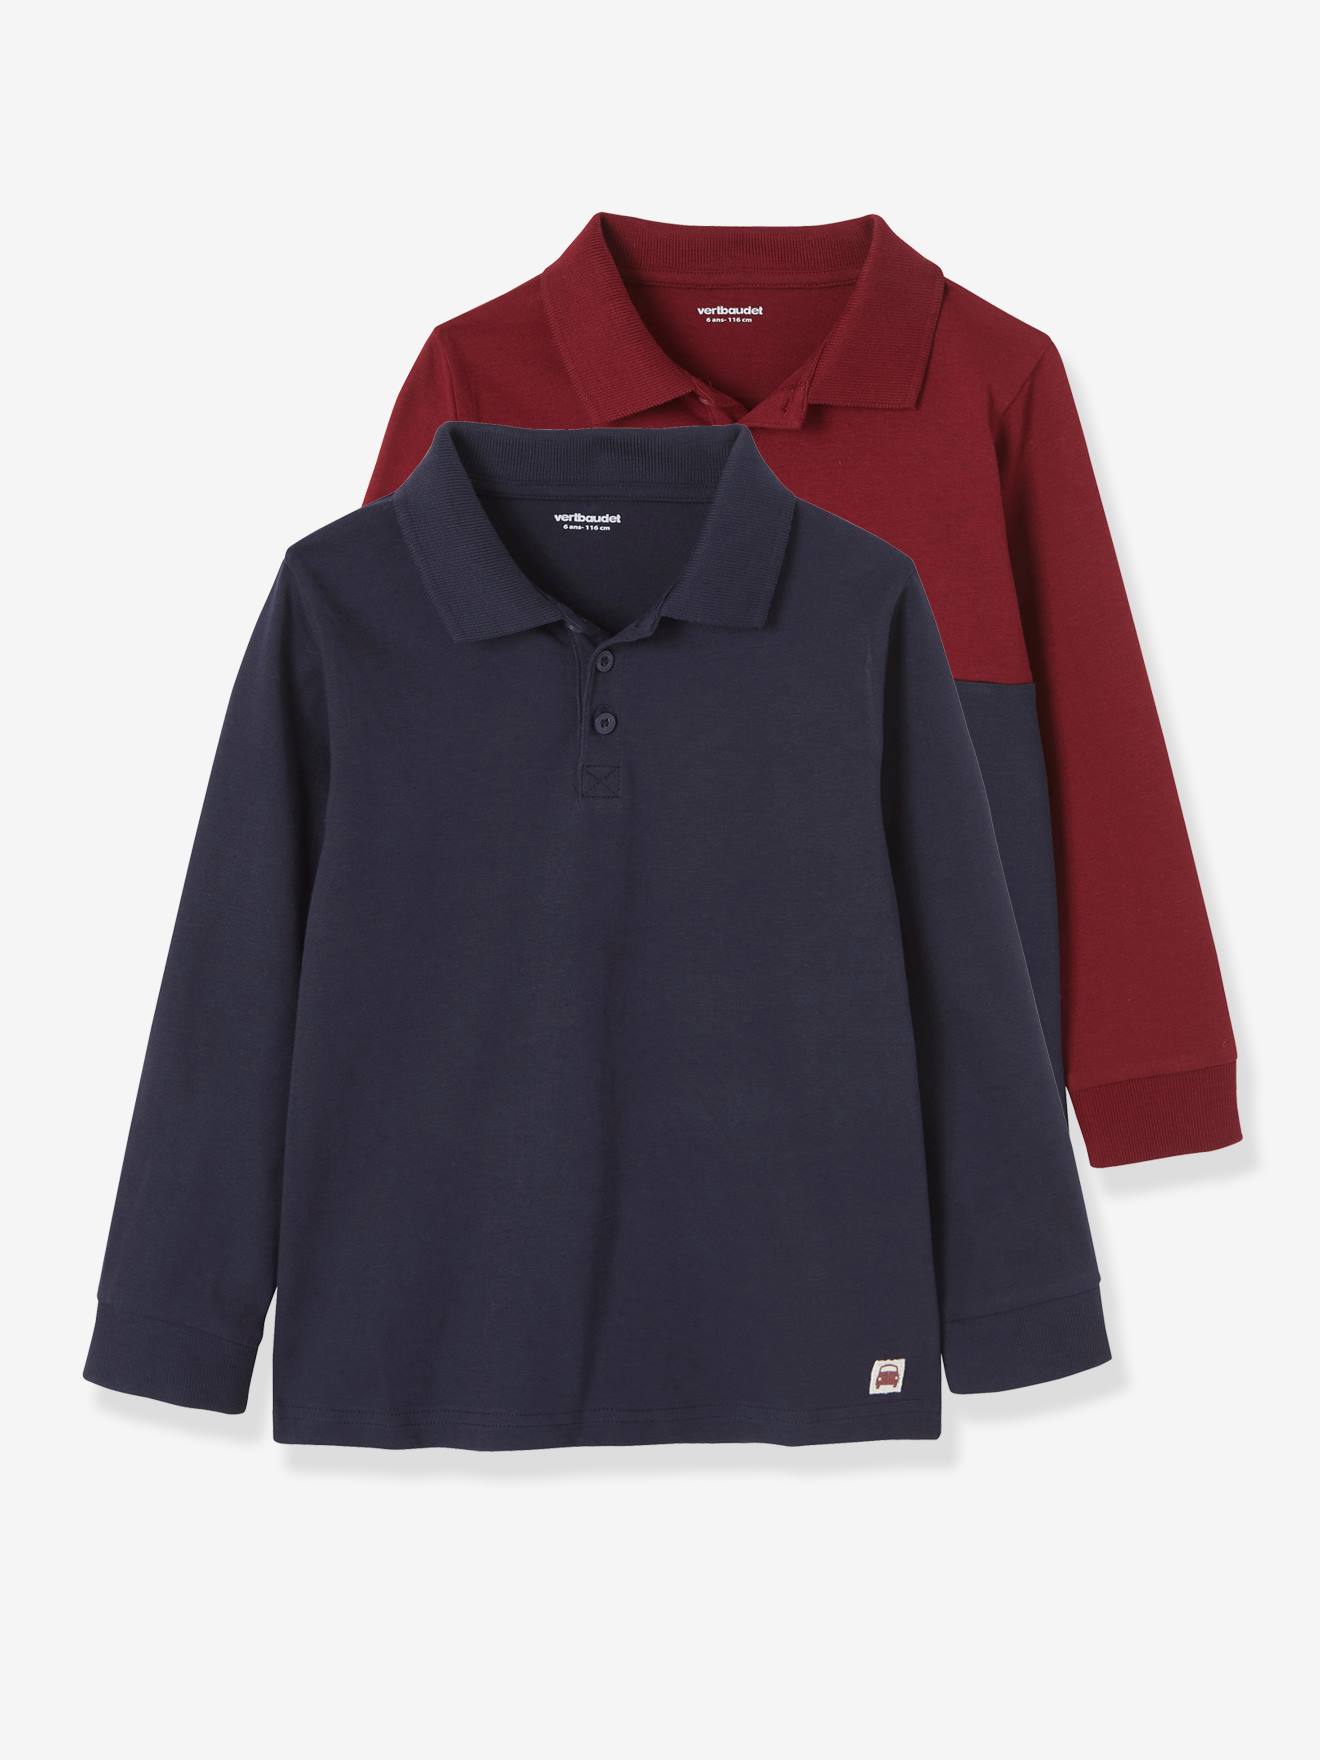 Pack of 2 Long-Sleeved Polo Shirts for Boys dark blue